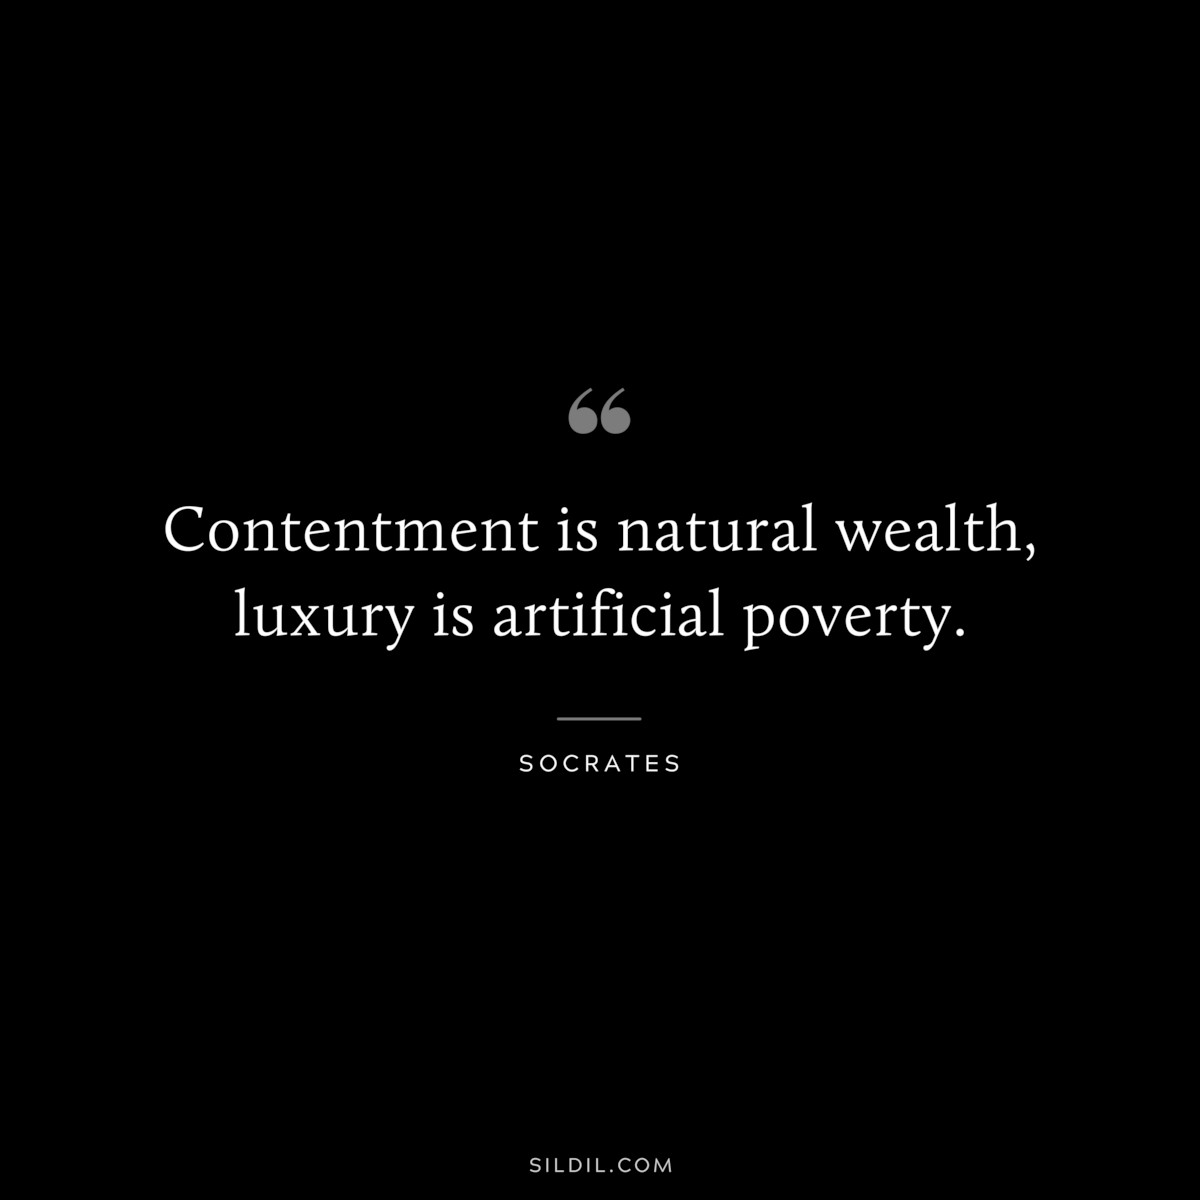 Contentment is natural wealth, luxury is artificial poverty. ― Socrates